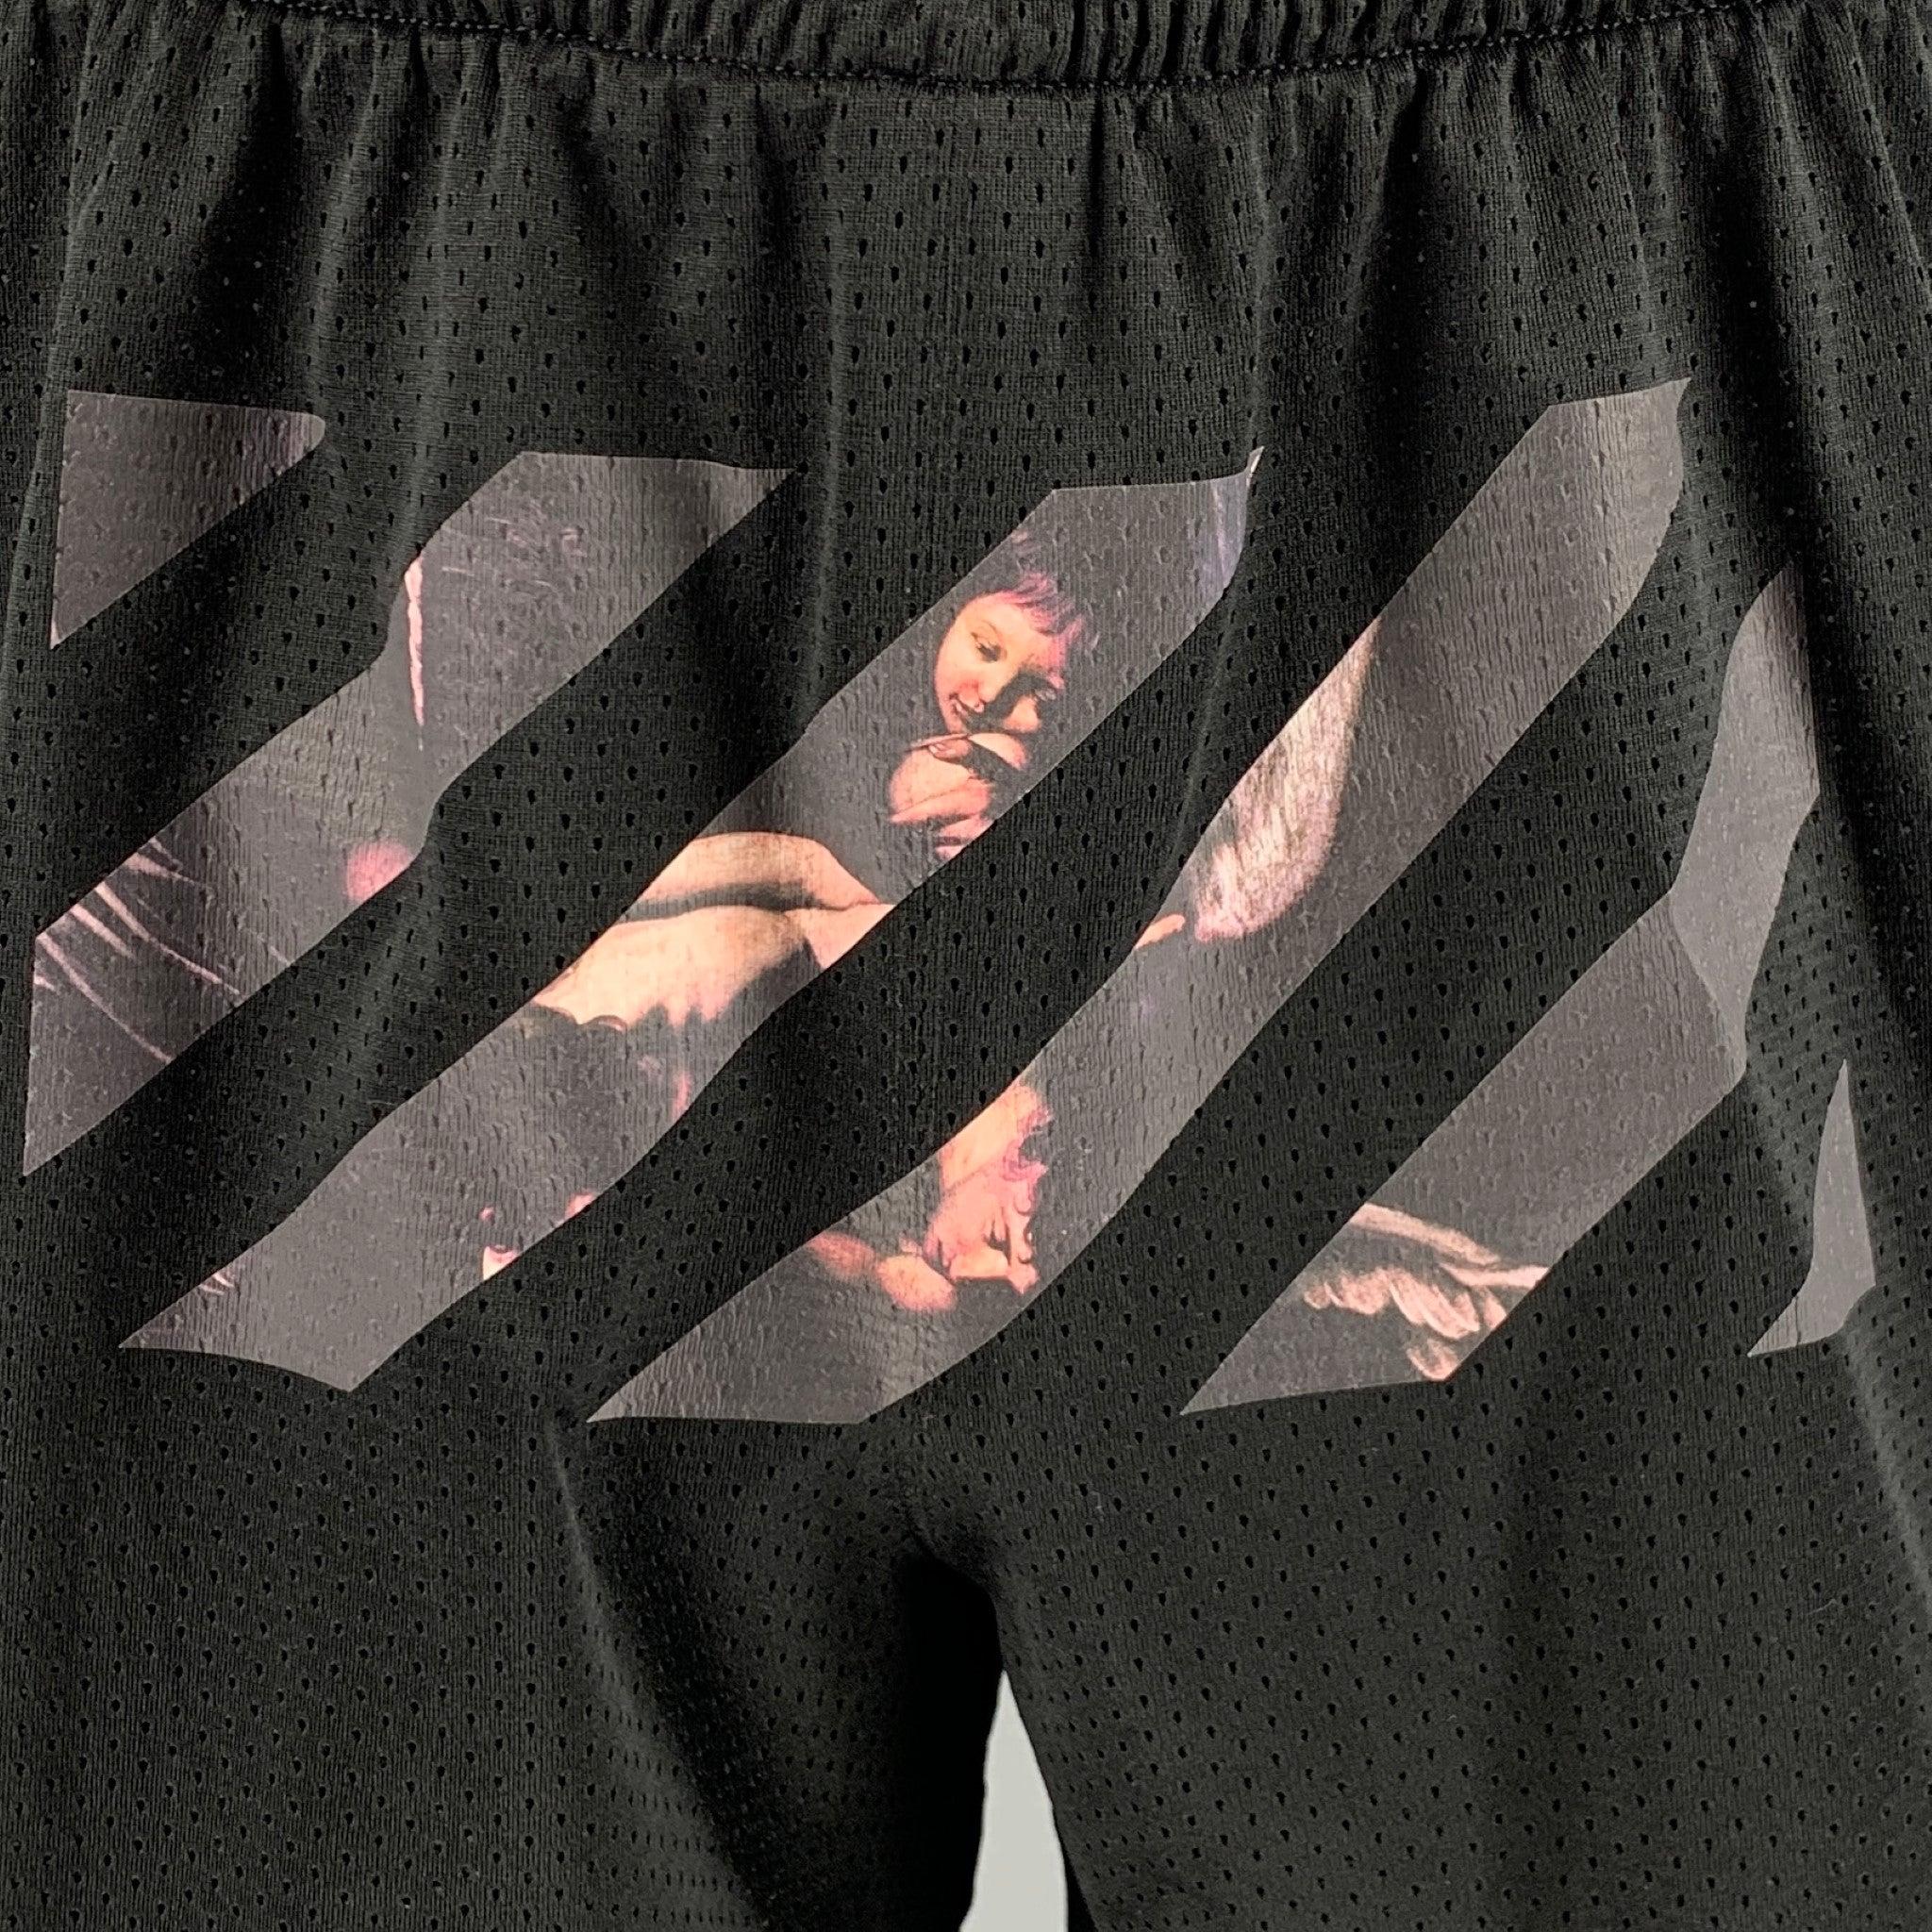 OFF-WHITE shorts
in a black polyester mesh fabric featuring Renaissance painting graphic on front, and elastic waistband. Made in Portugal.Excellent Pre-Owned Condition. 

Marked:   L 

Measurements: 
  Waist: 30 inches Rise: 11 inInseam: 5.5 inches